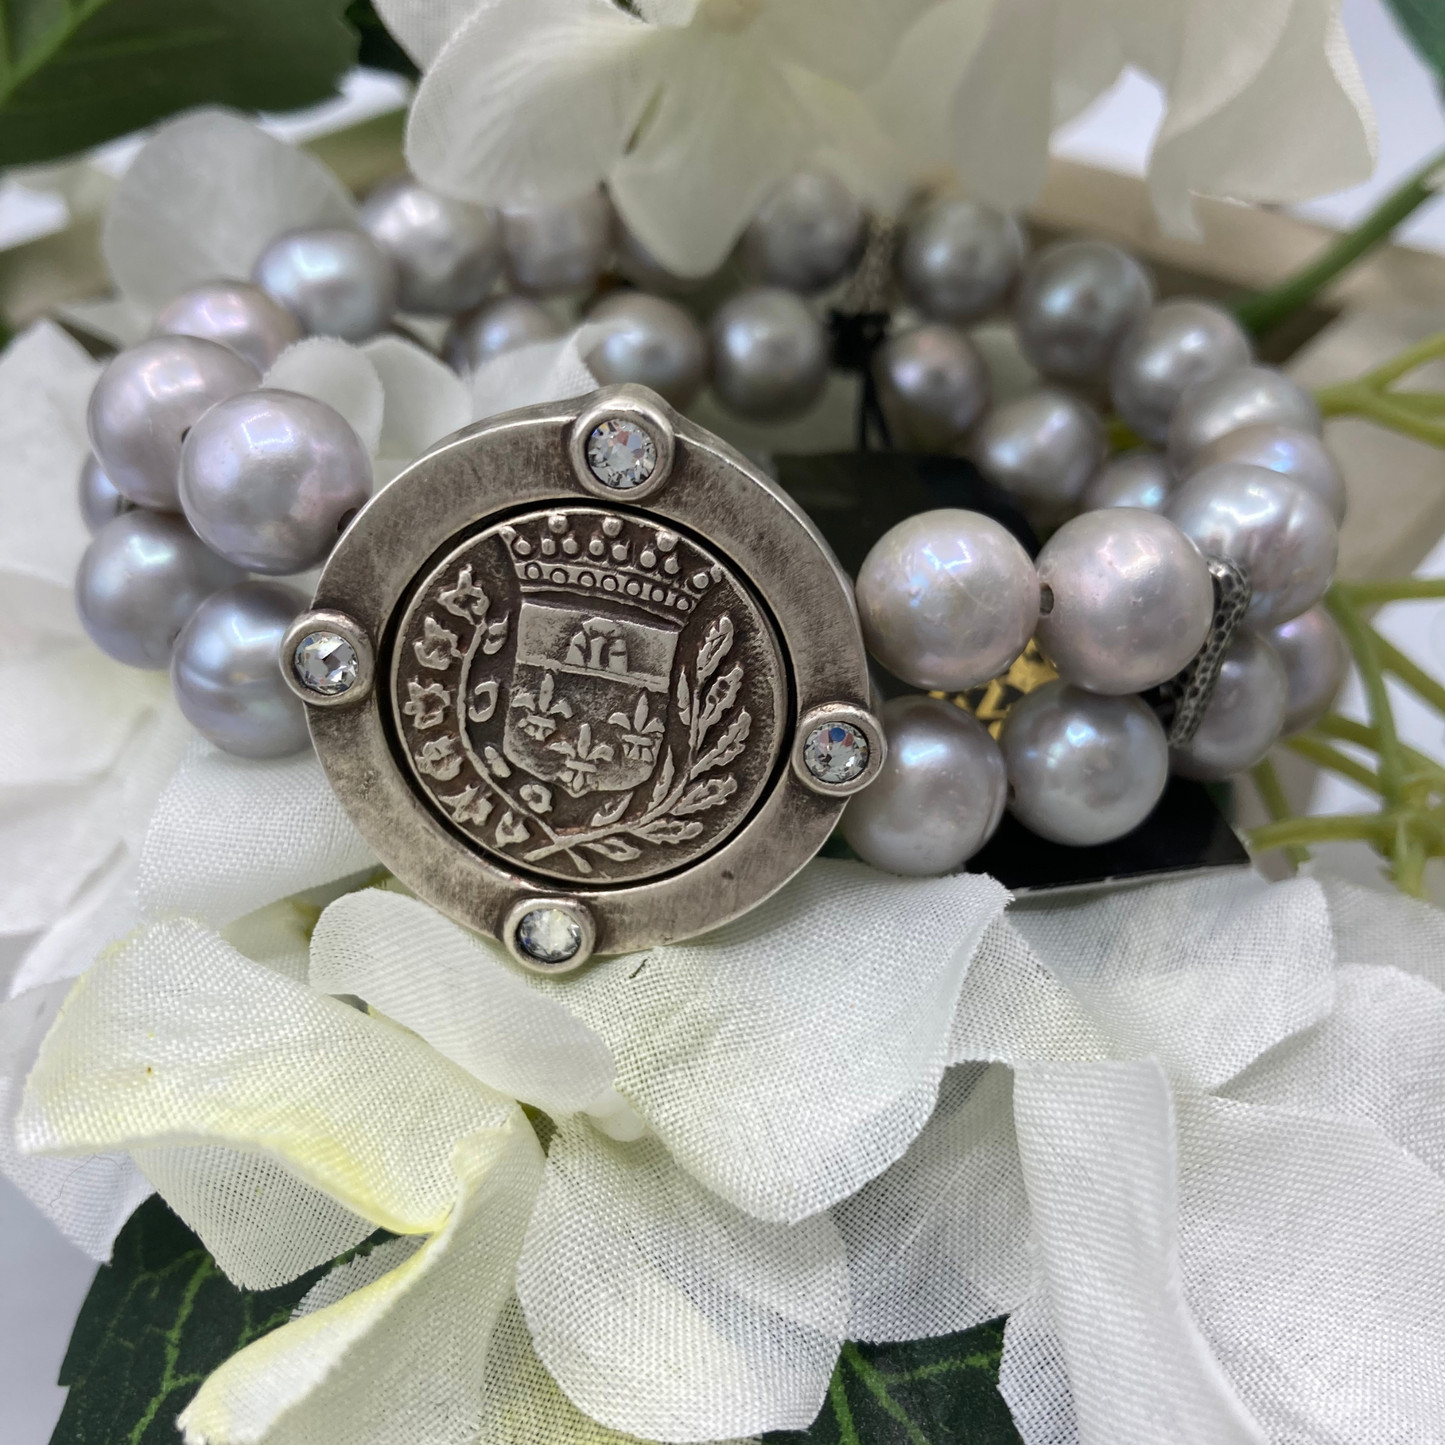 A silver pearl bracelet is pictured featuring a silver coat of arms medallion encrusted with 4 small diamonds on the periphery. 